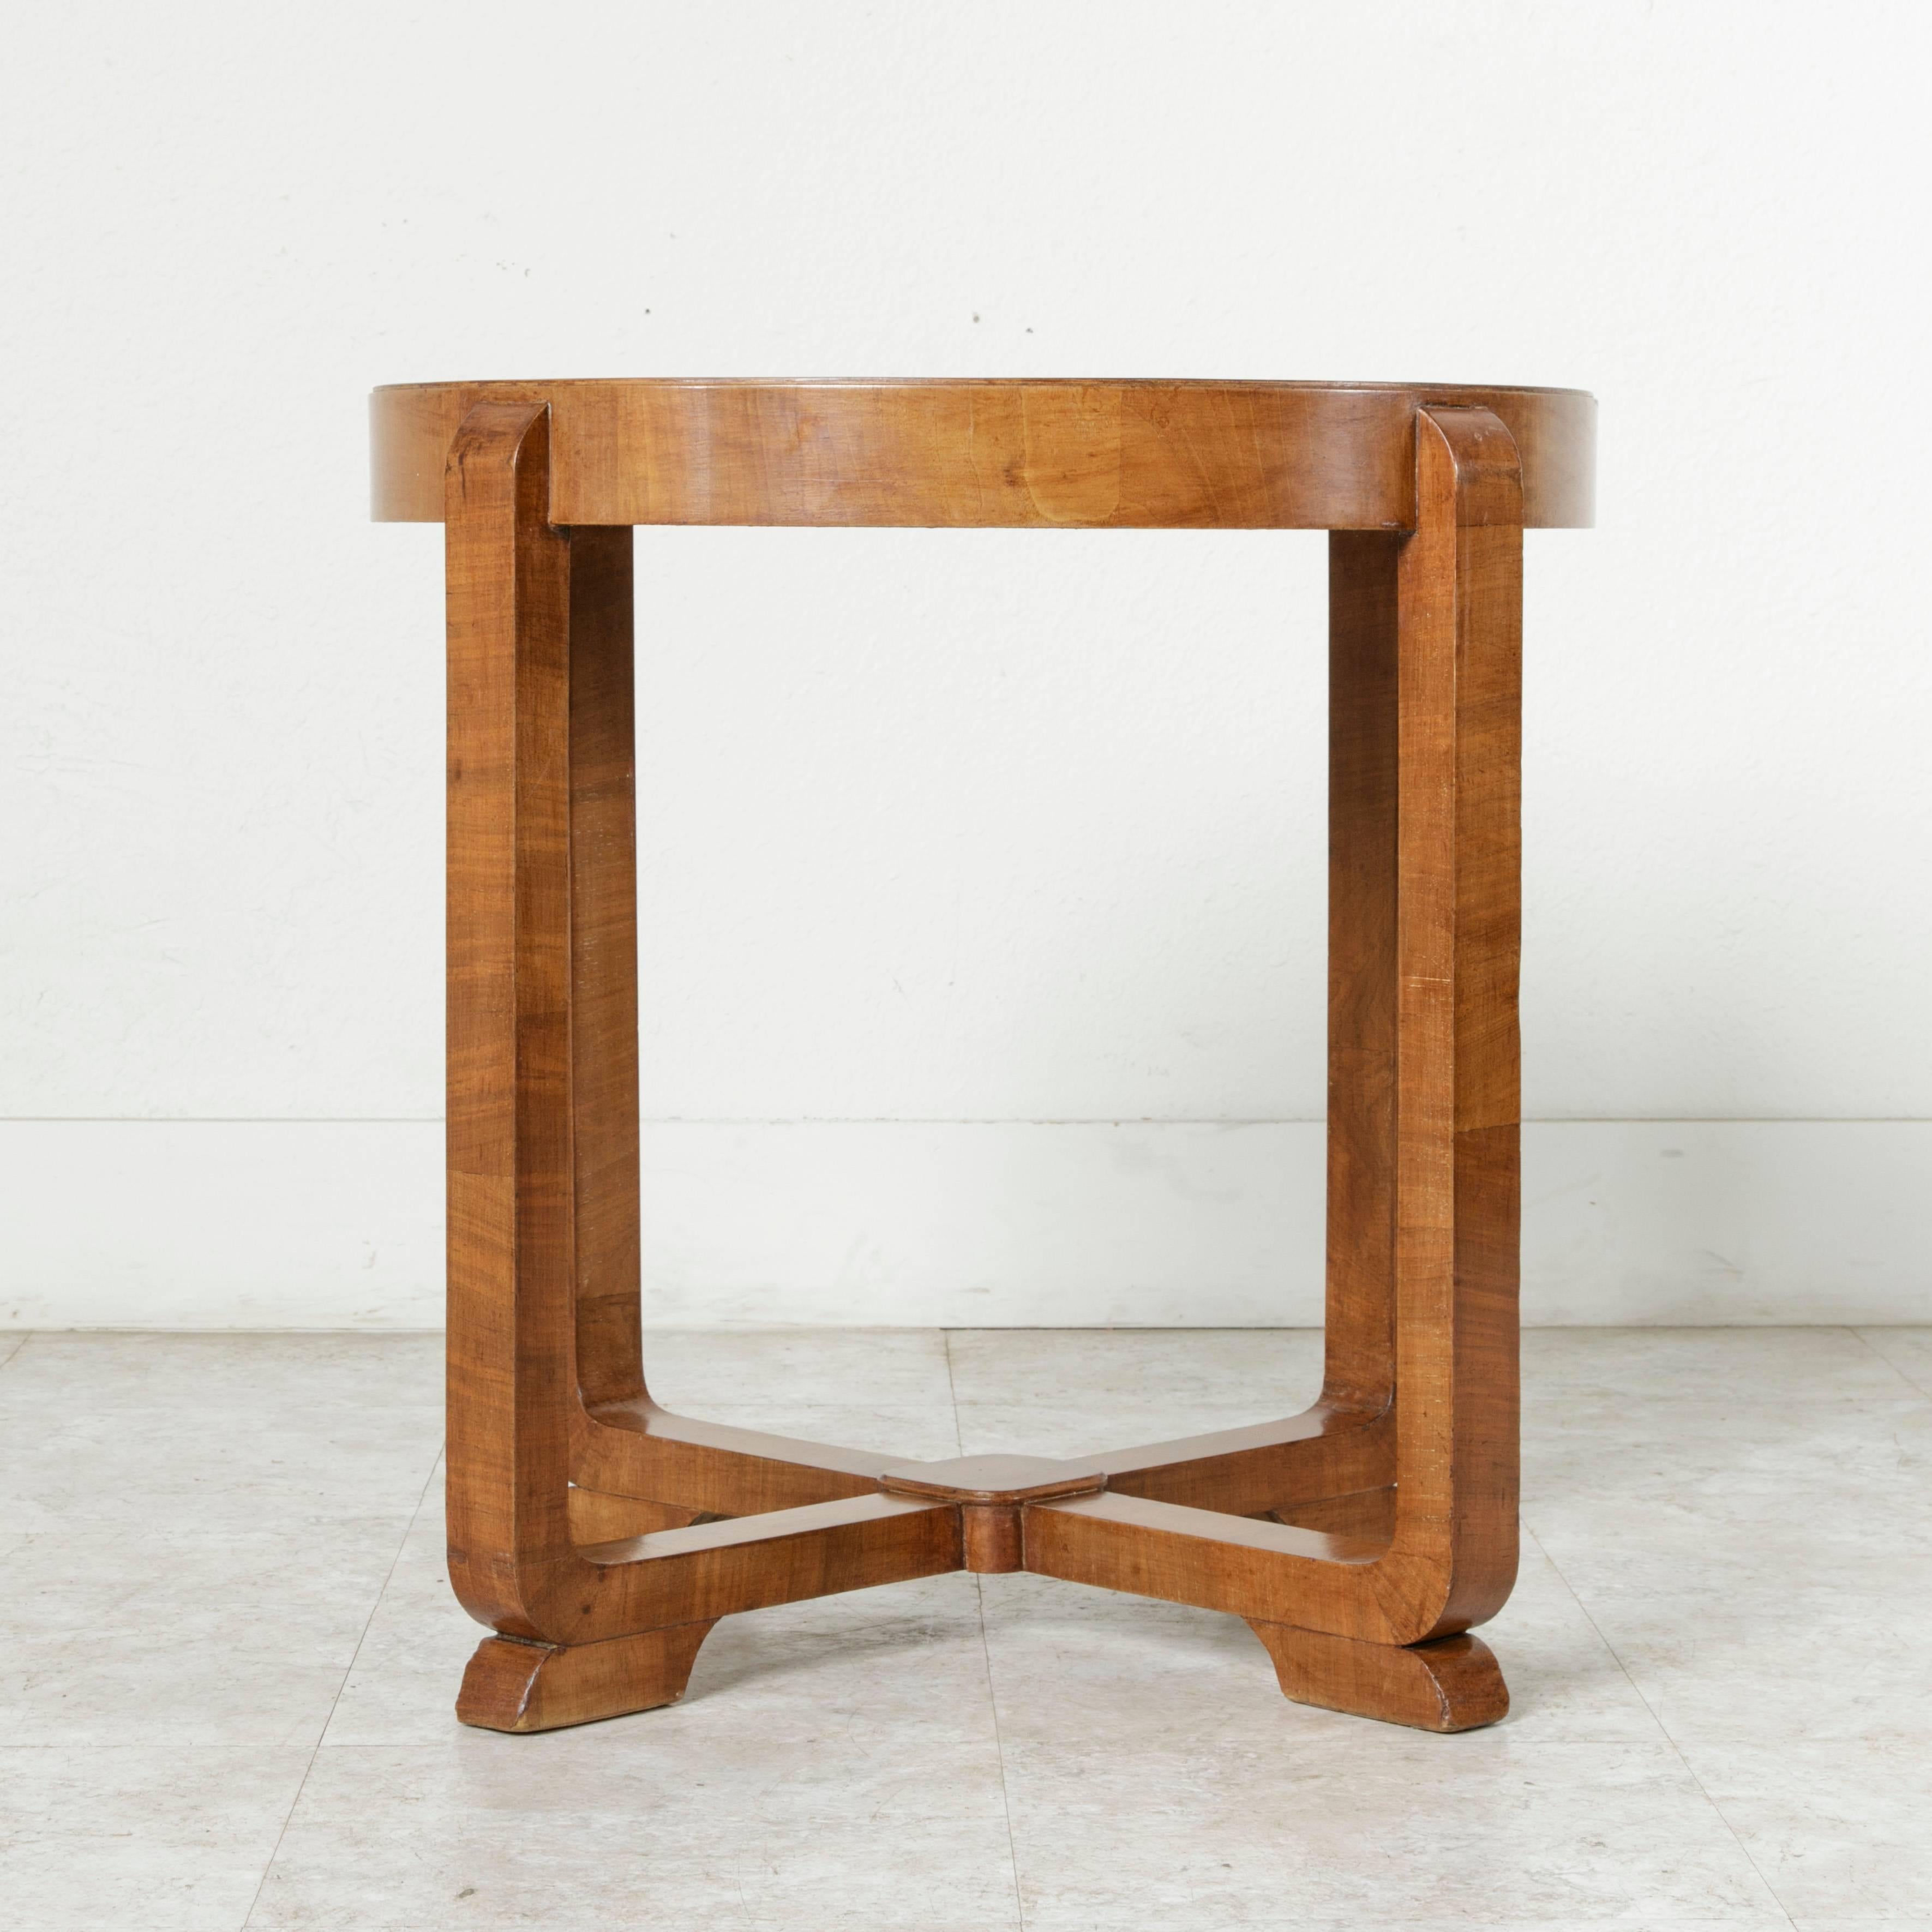 French Art Deco Period Bookmatched Burl Walnut Side Table, Occasional Table 3